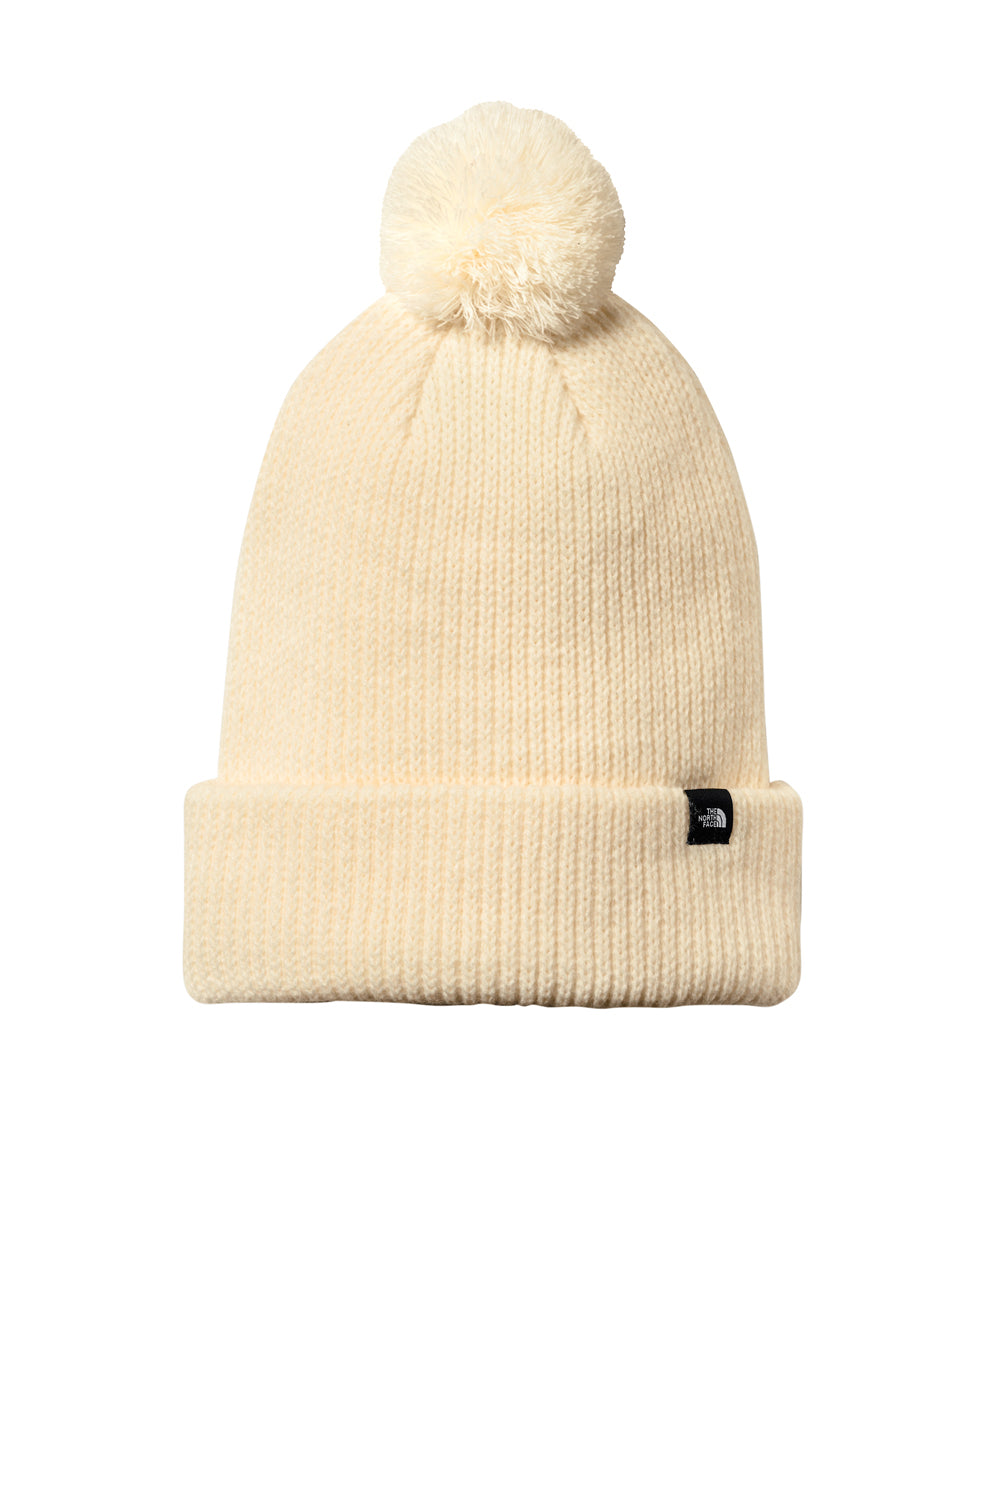 The North Face NF0A7RGI Pom Beanie Vintage White Front